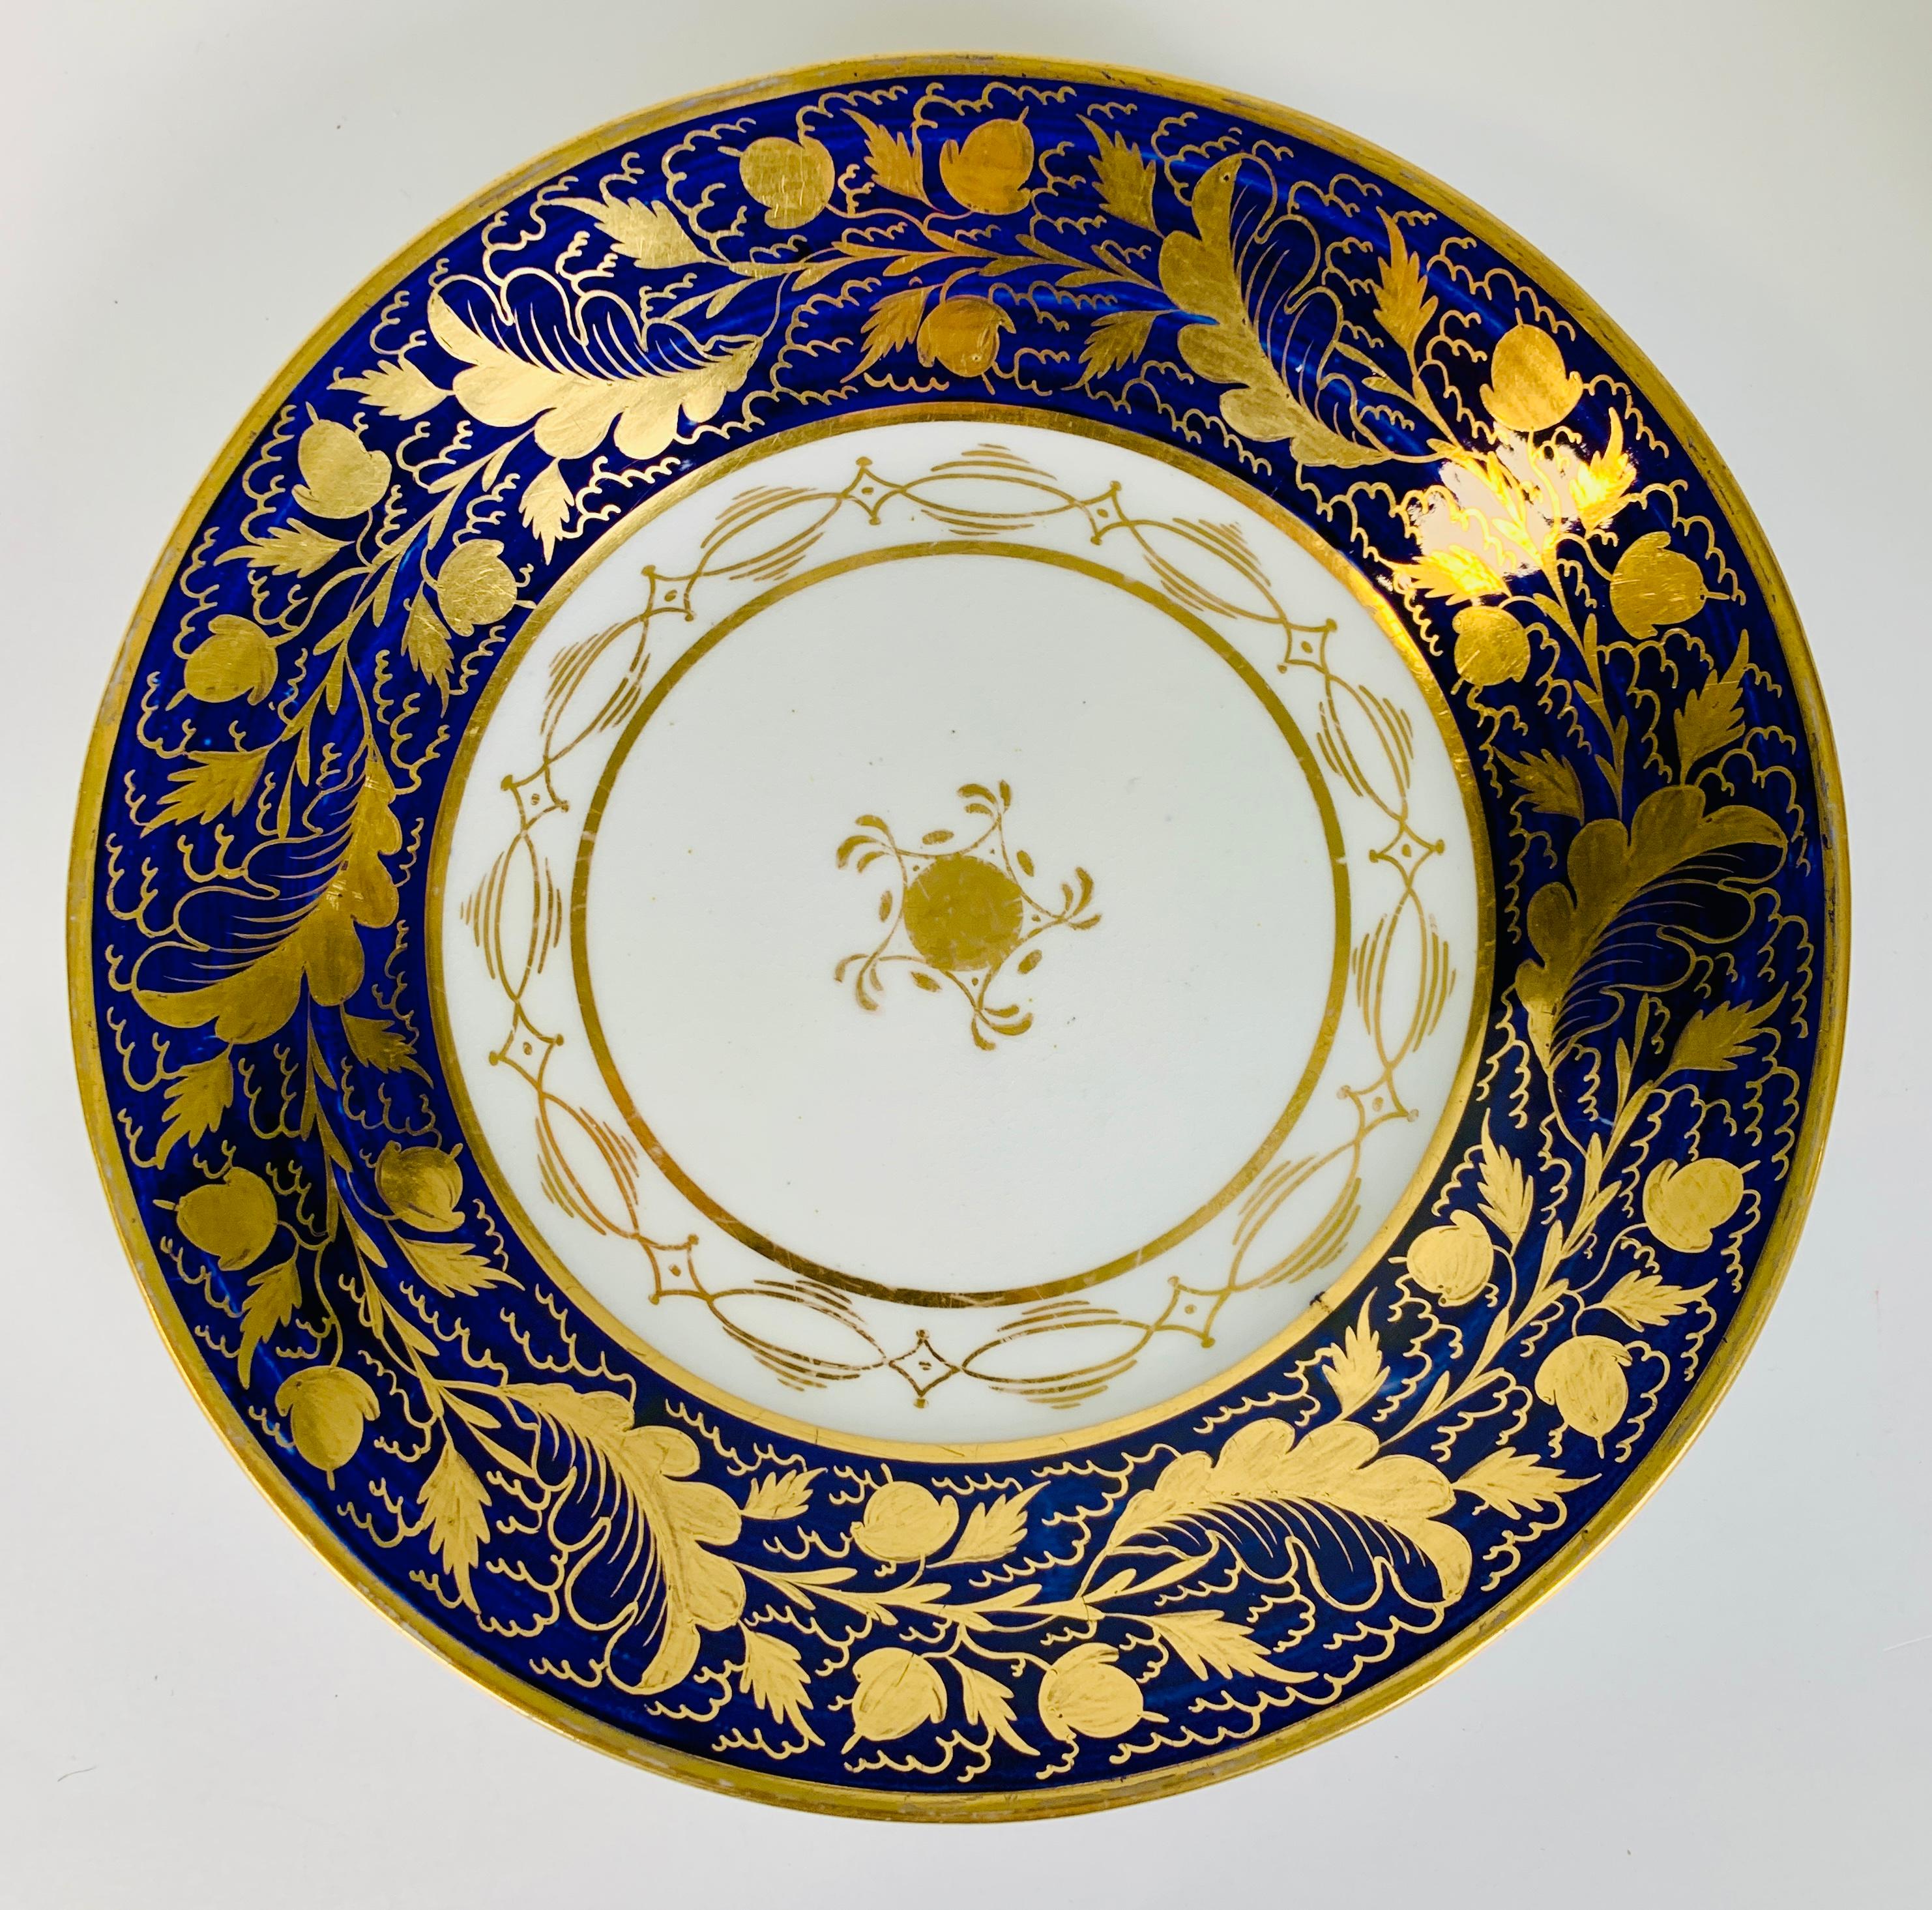 An exquisite pair of gold-on-blue New Hall porcelain dishes made in England circa 1790.
The gilding was done by hand.
The design of these dishes features gold decoration of acorns and oak leaves on a deep cobalt blue ground (see images).
Dimensions: